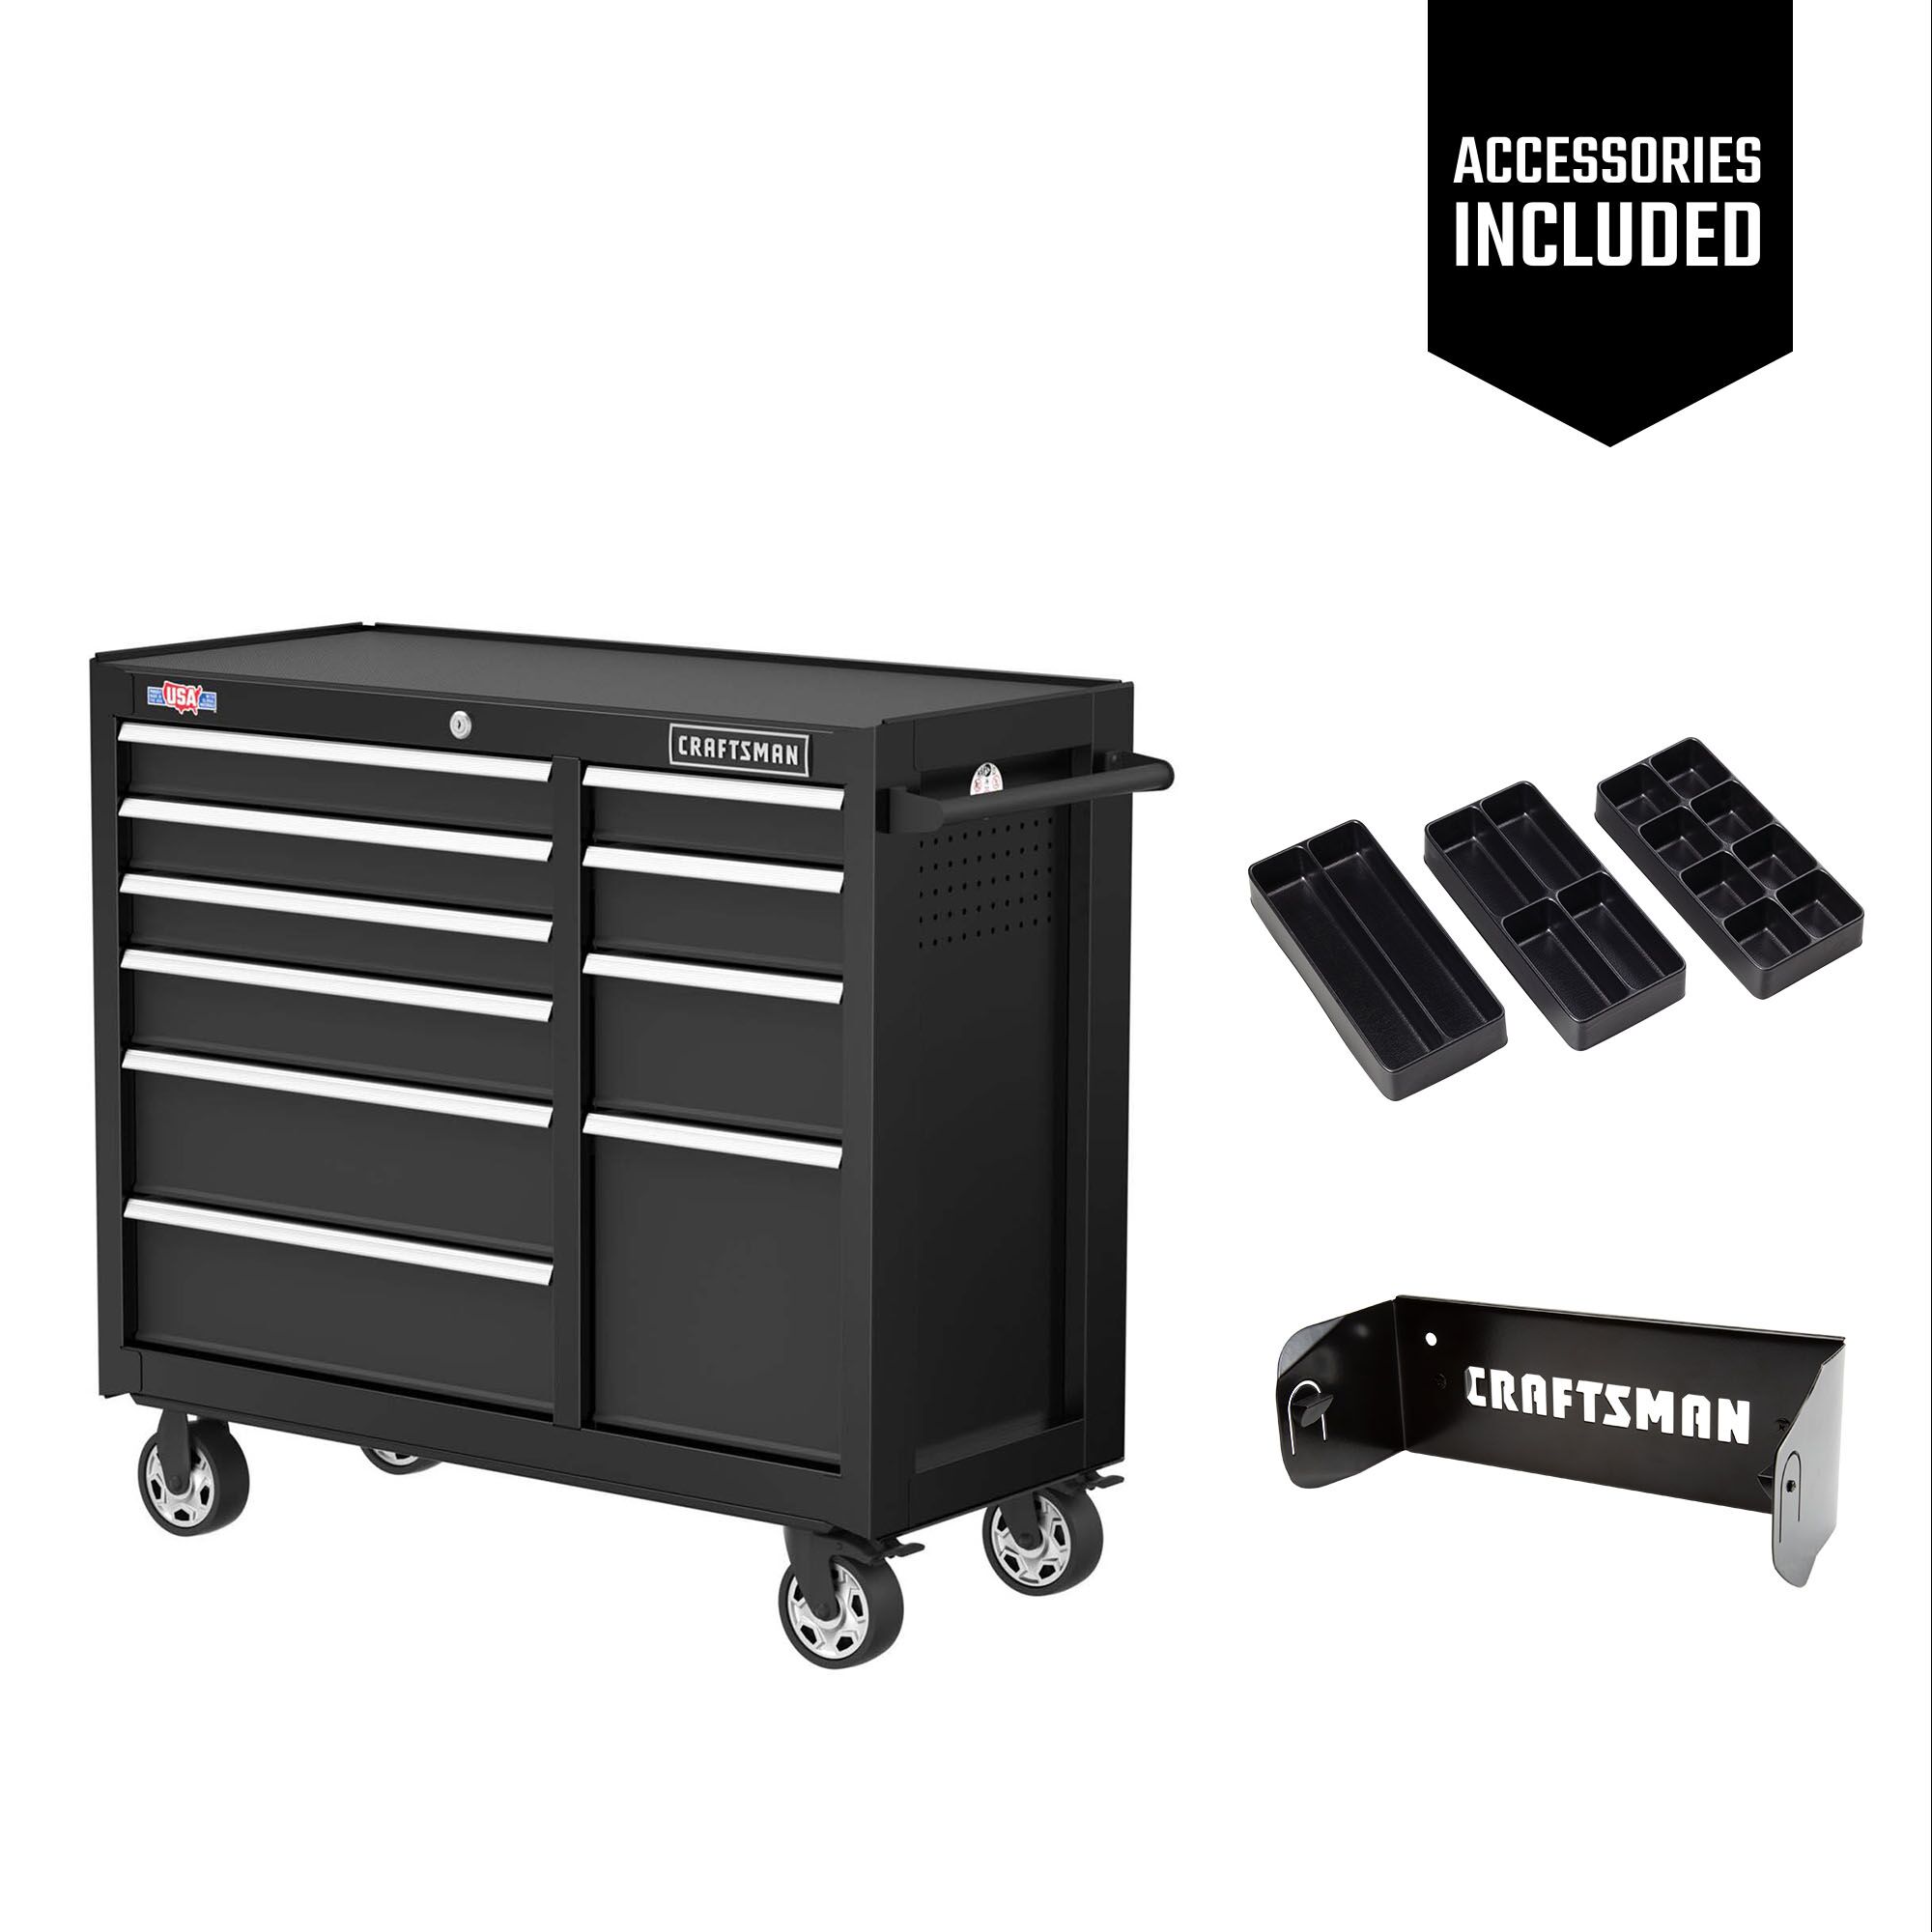 One black CRAFTSMAN 41 inch Wide 6-Drawer Mobile Workbench with three black Cabinet Drawer Trays and one black Magnetic Paper Towel Holder included